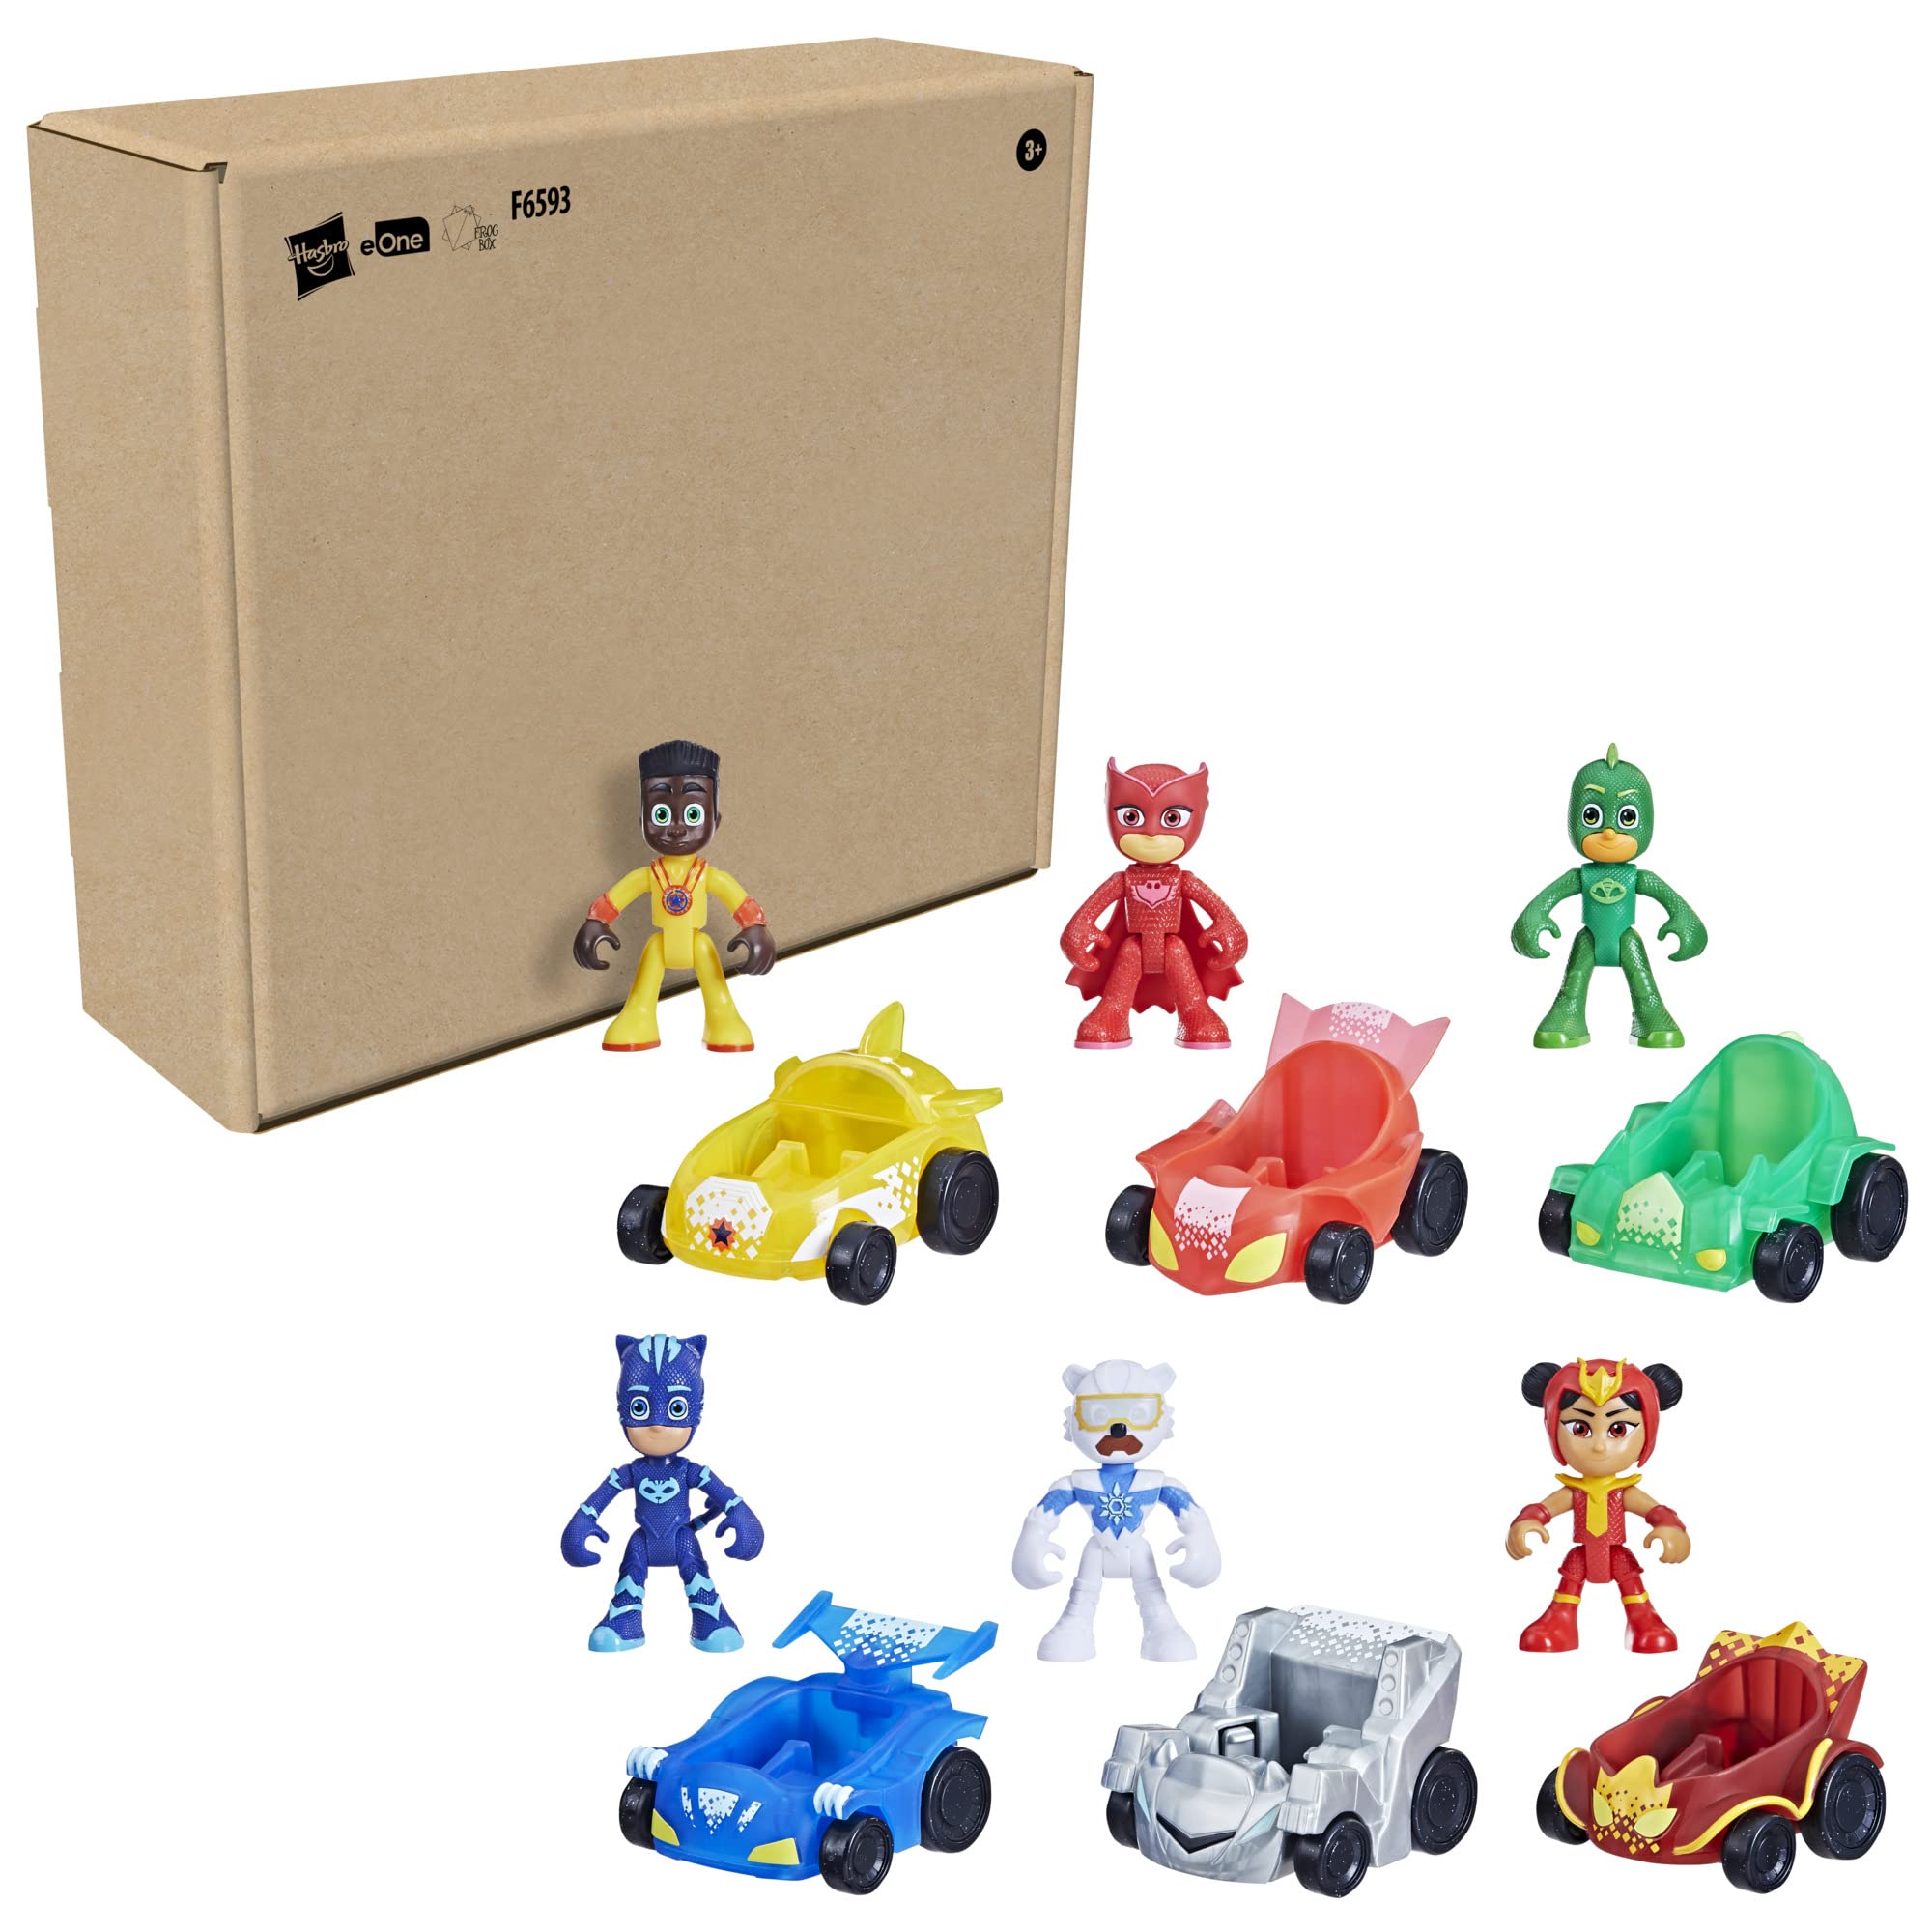 PJ Masks Power Heroes Racer Collection Preschool Toy with 6 Action Figures and 6 Vehicles for Kids 3 Years Up